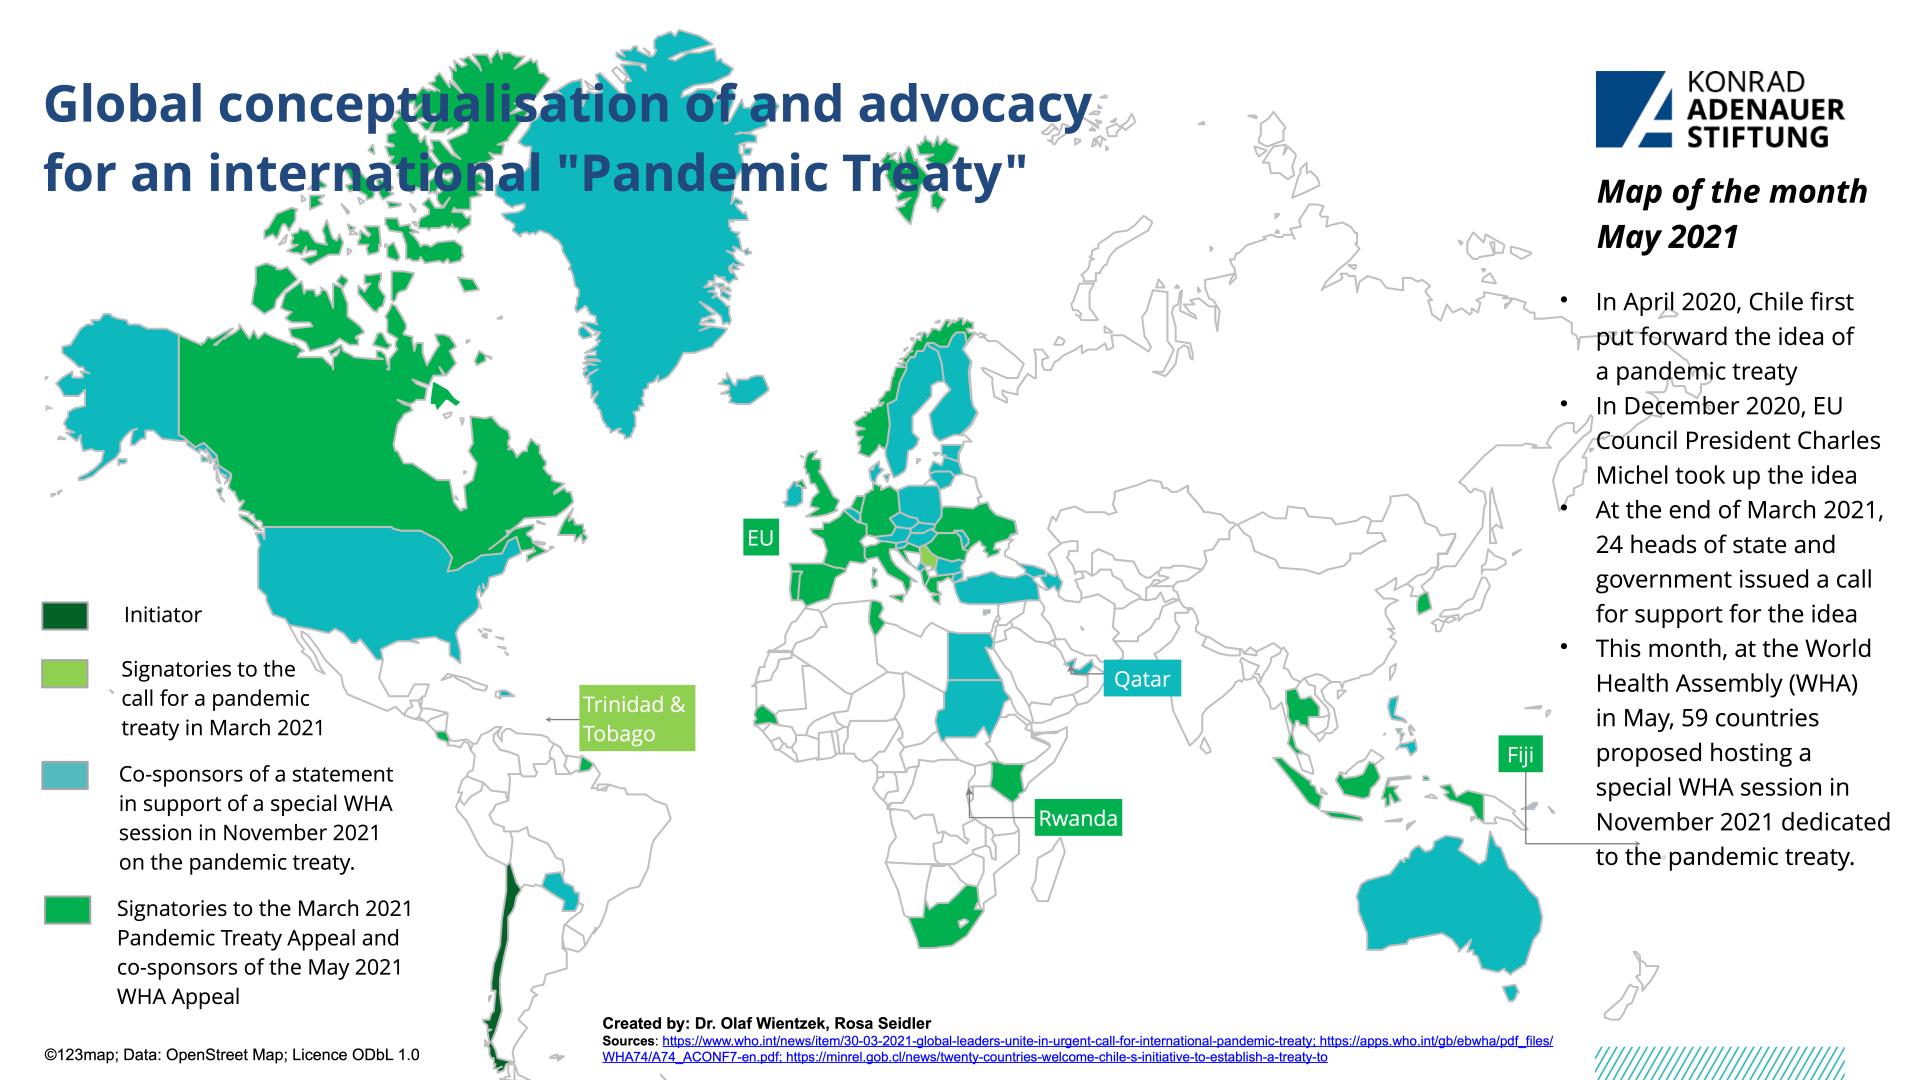 Global conceptualisation of and advocacy for an international "Pandemic